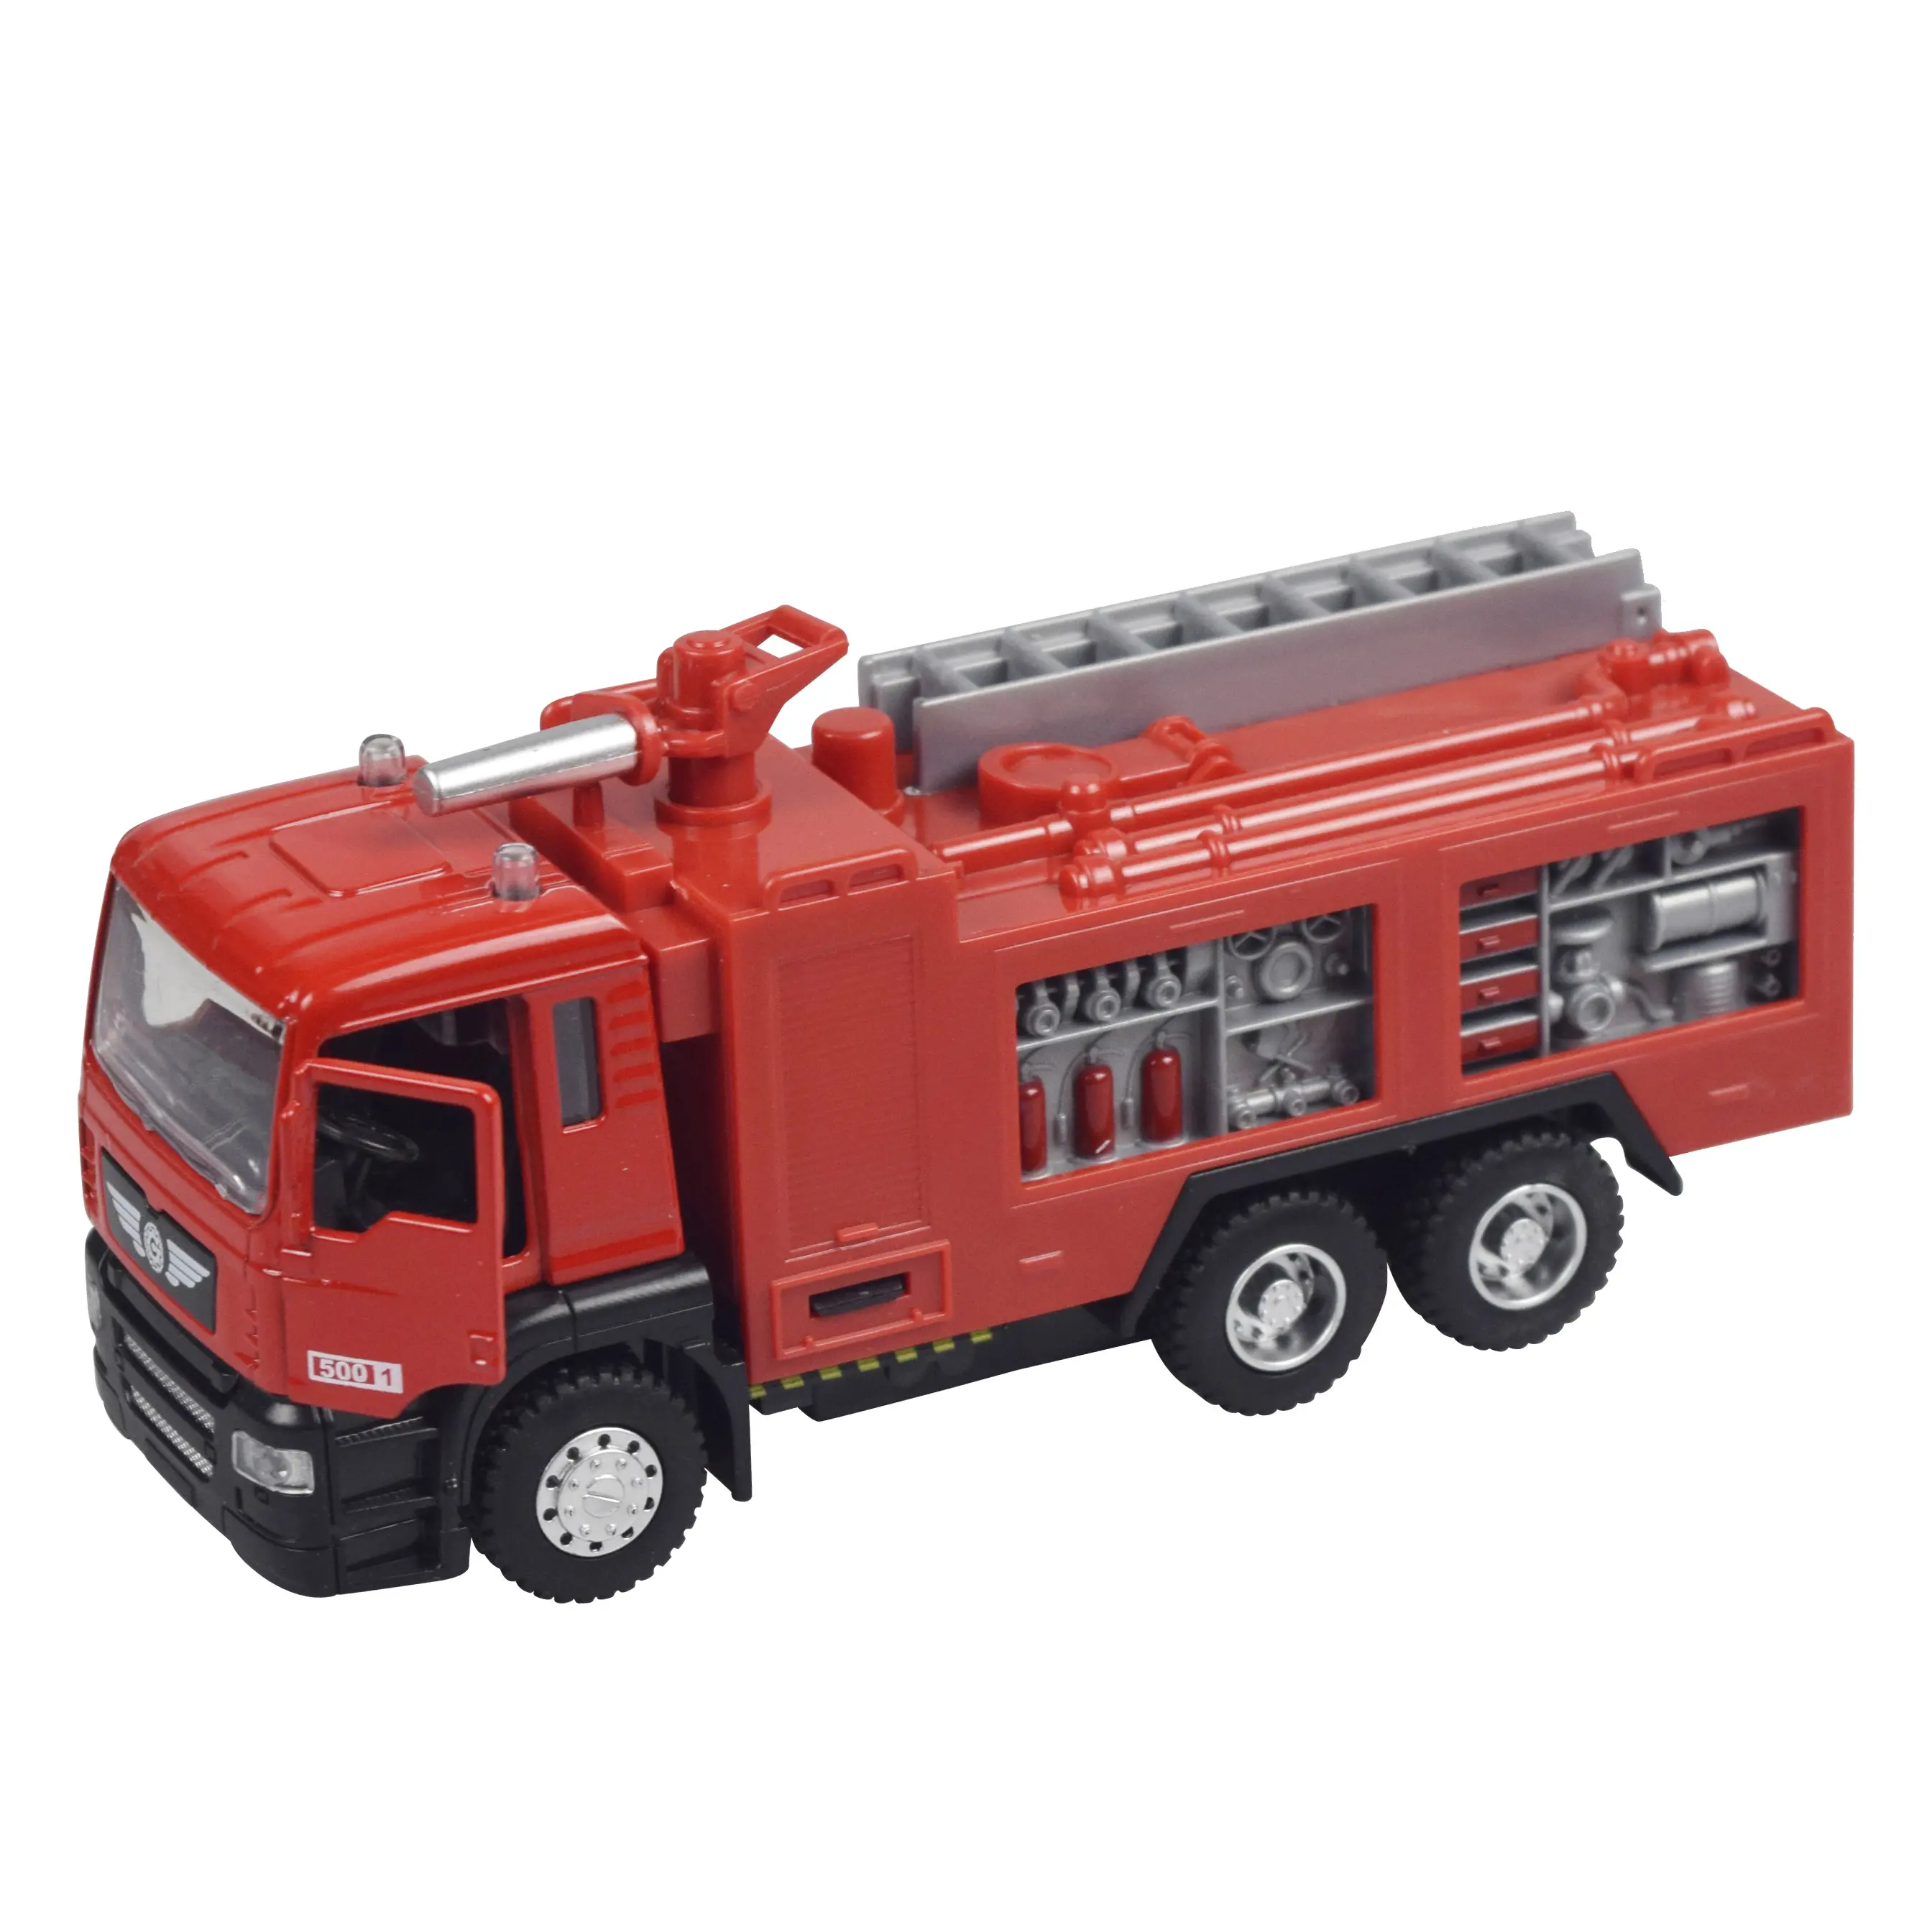 1:50 metal die cast Fire truck toys for kids zinc alloy toy vehicles model car pull back with music and light